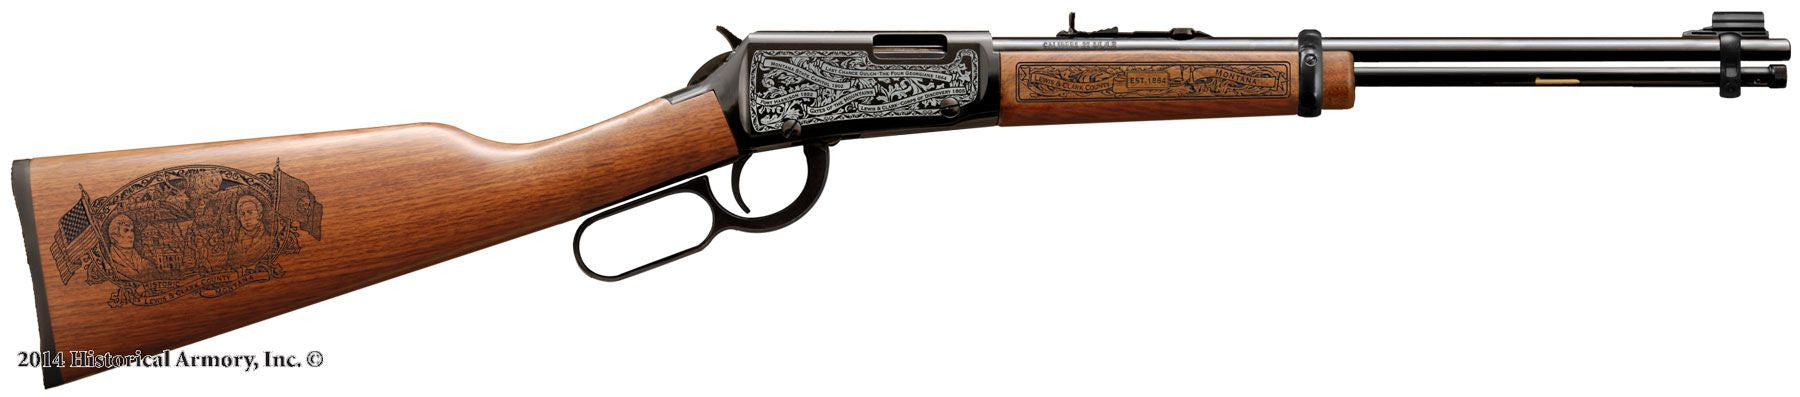 Lewis Clark county montana engraved rifle H001